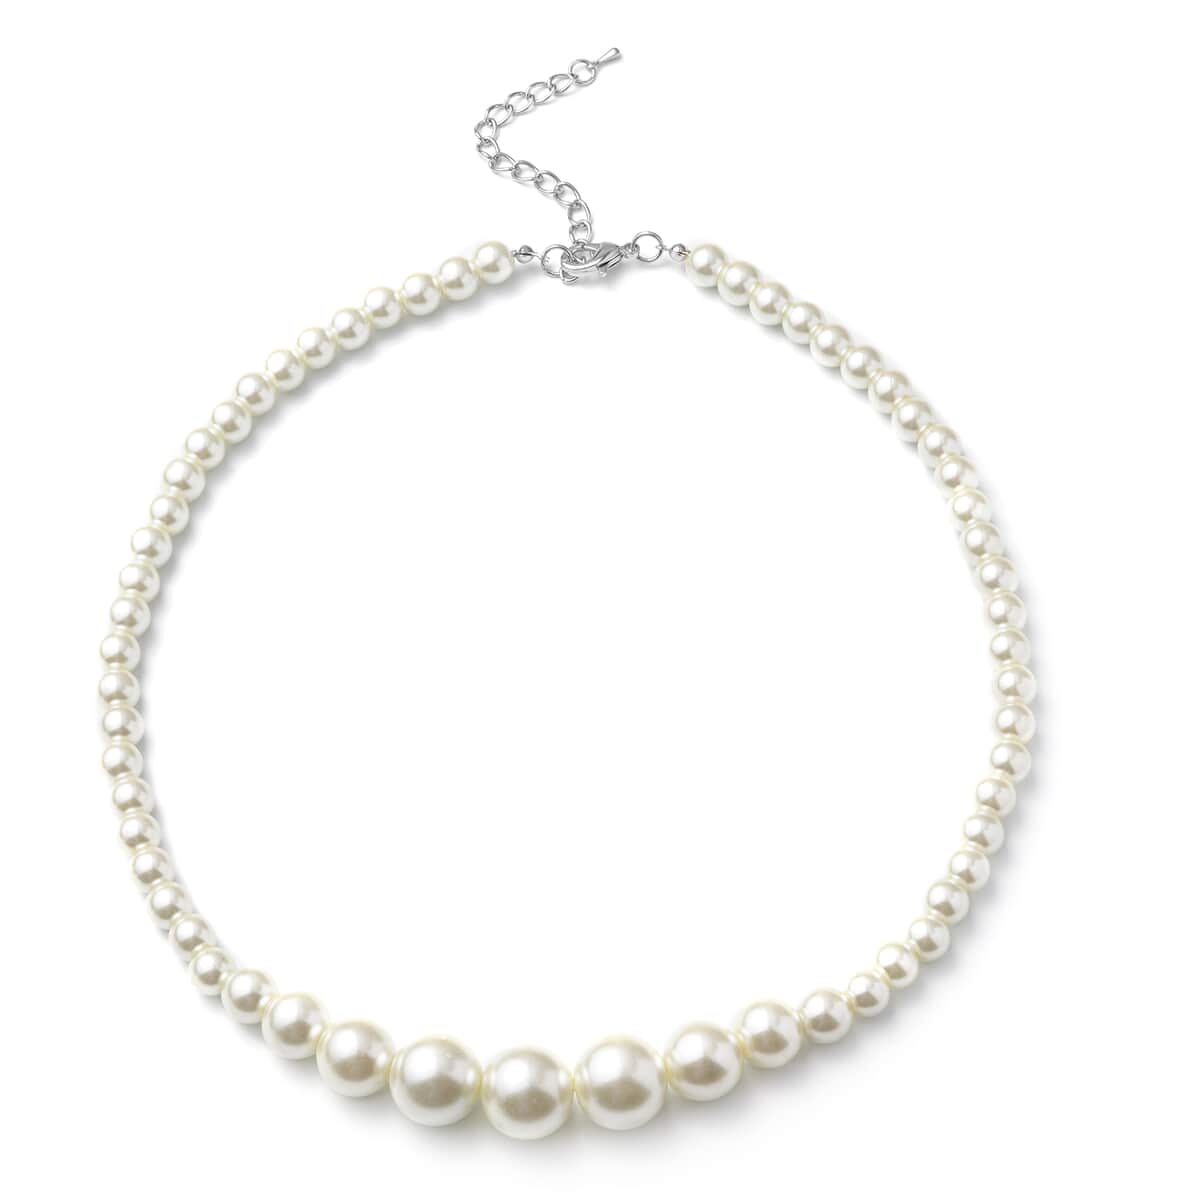 Set of 2 Simulated White Pearl Necklace 20-22 Inches and Earrings in Silvertone and Stainless Steel image number 2